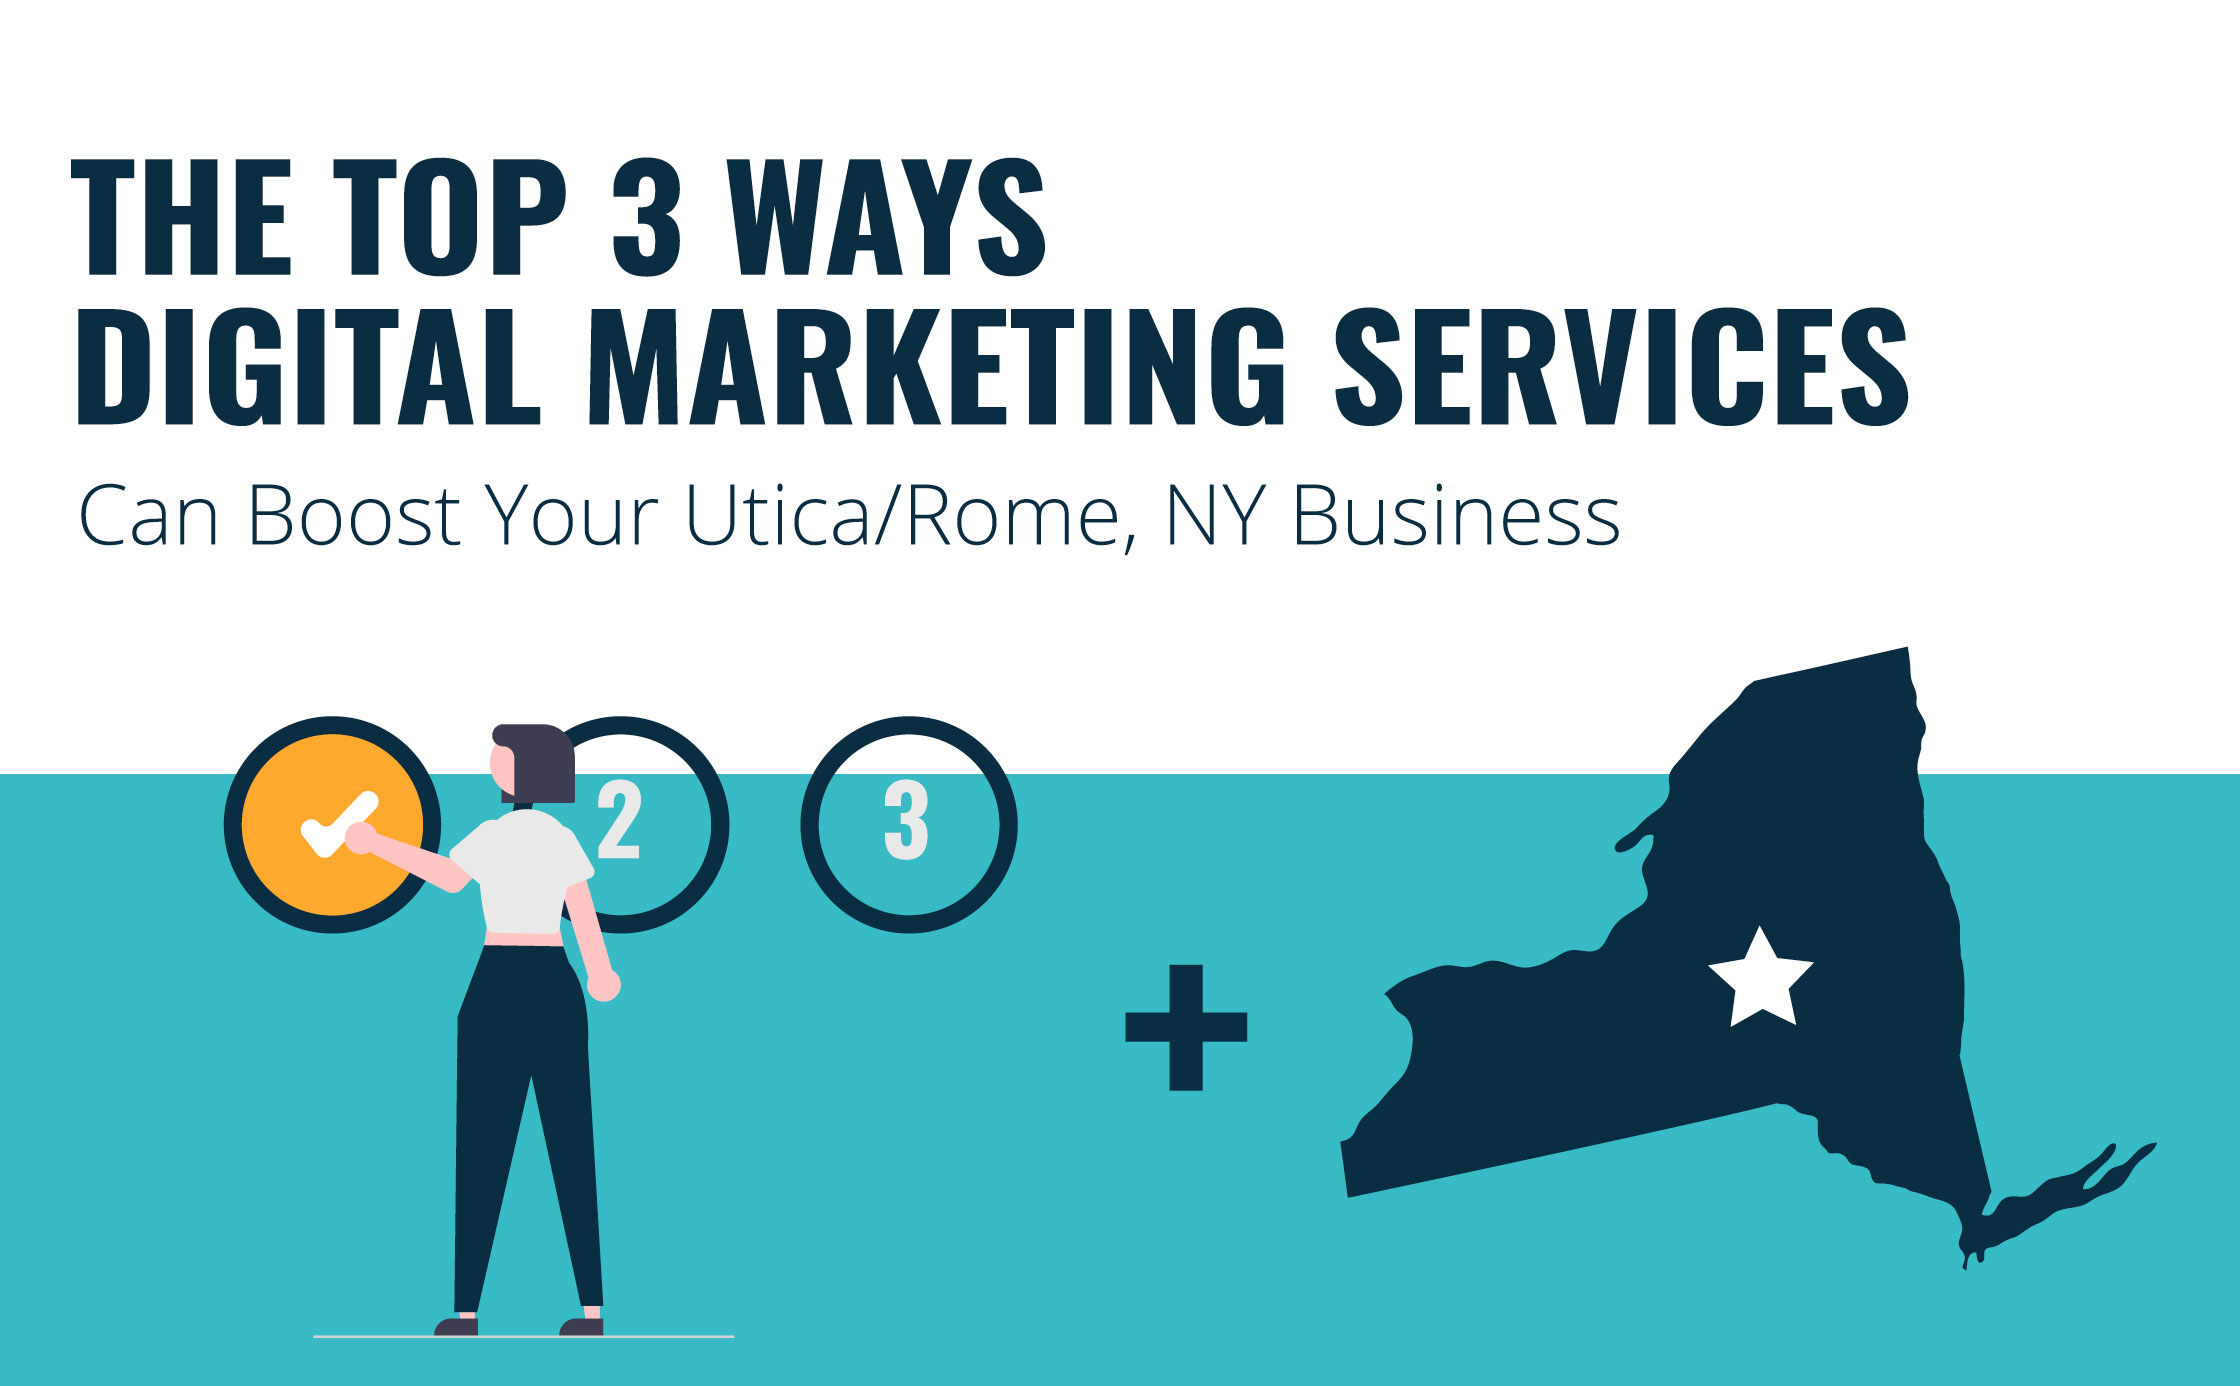 The Top 3 Ways Digital Marketing Services Can Boost Your Utica/Rome, NY Business